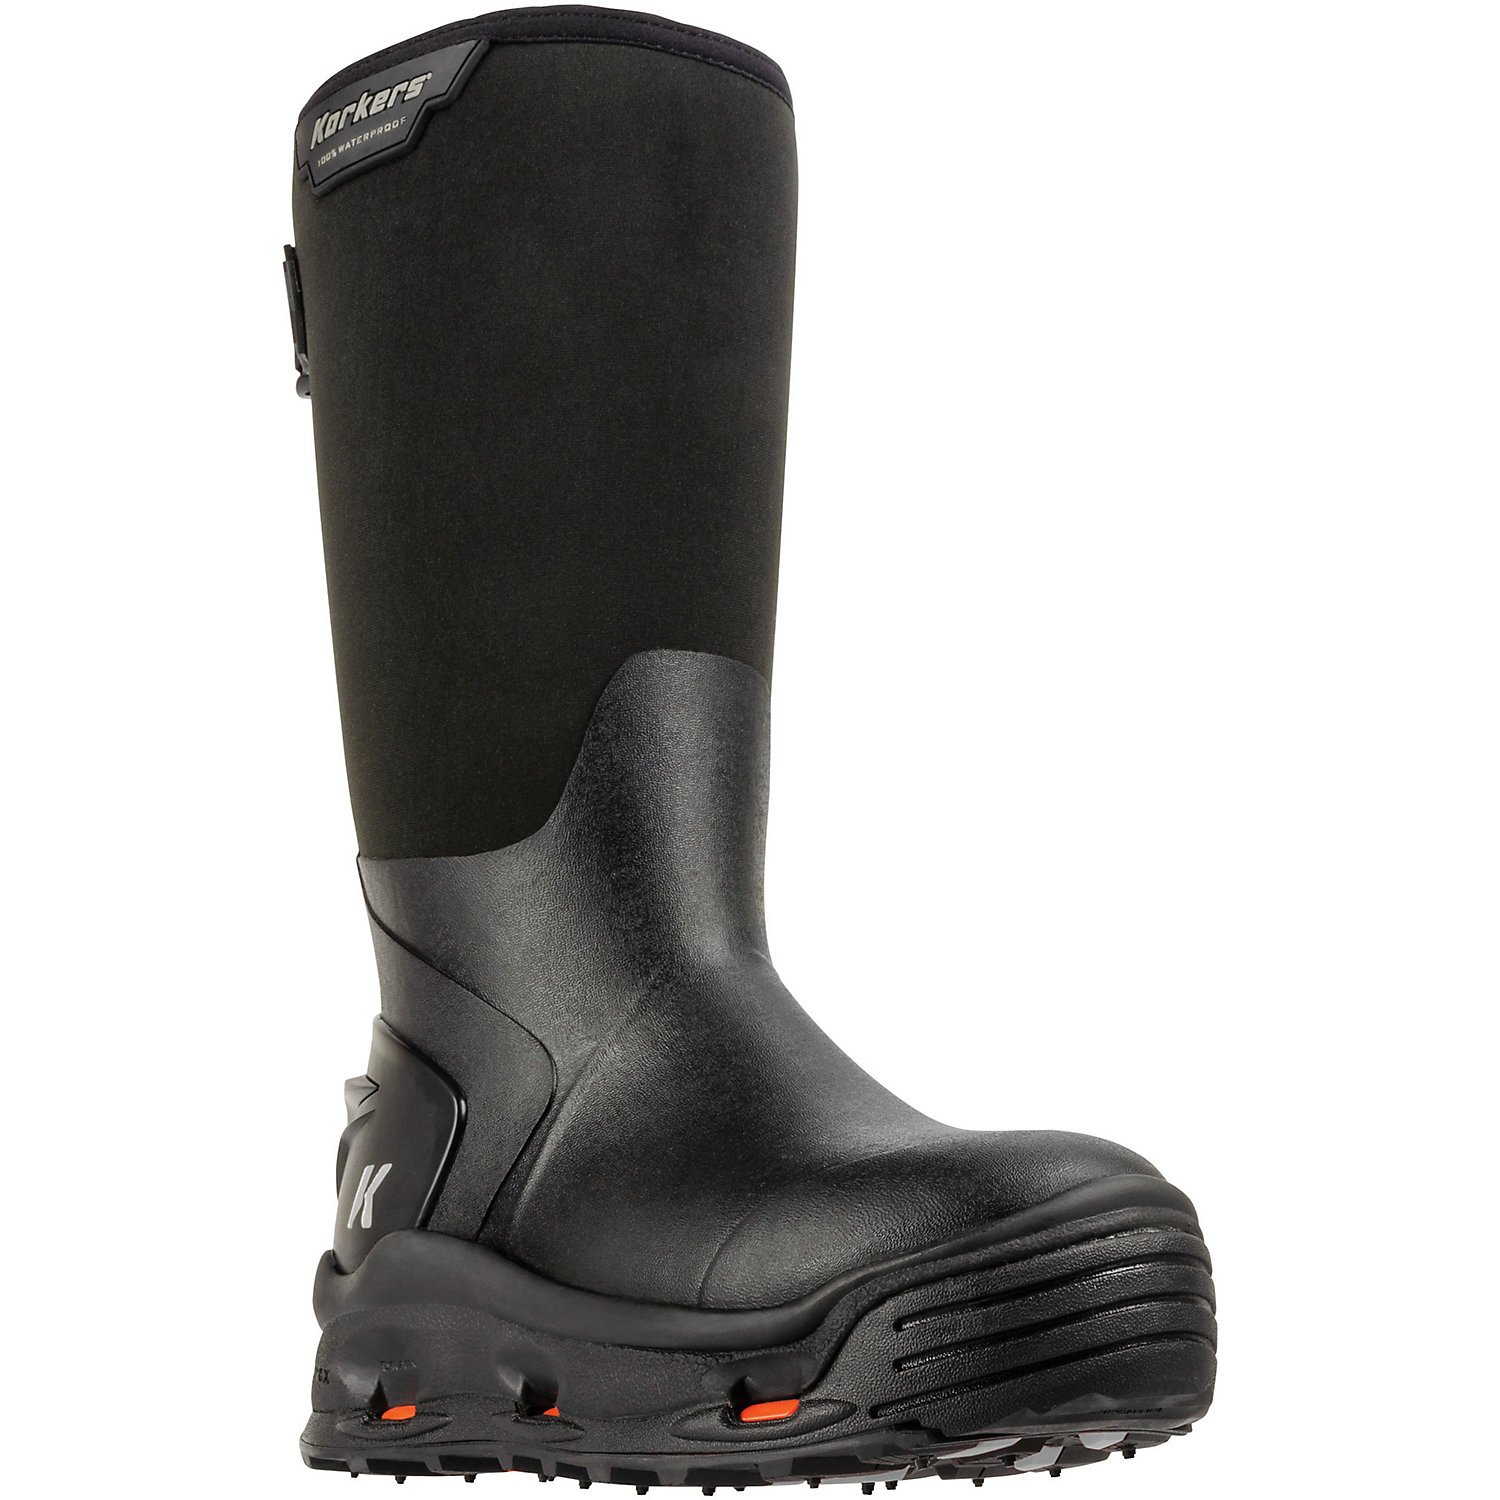 Korkers Mens Neo Arctic Boot with All Terrain Sole